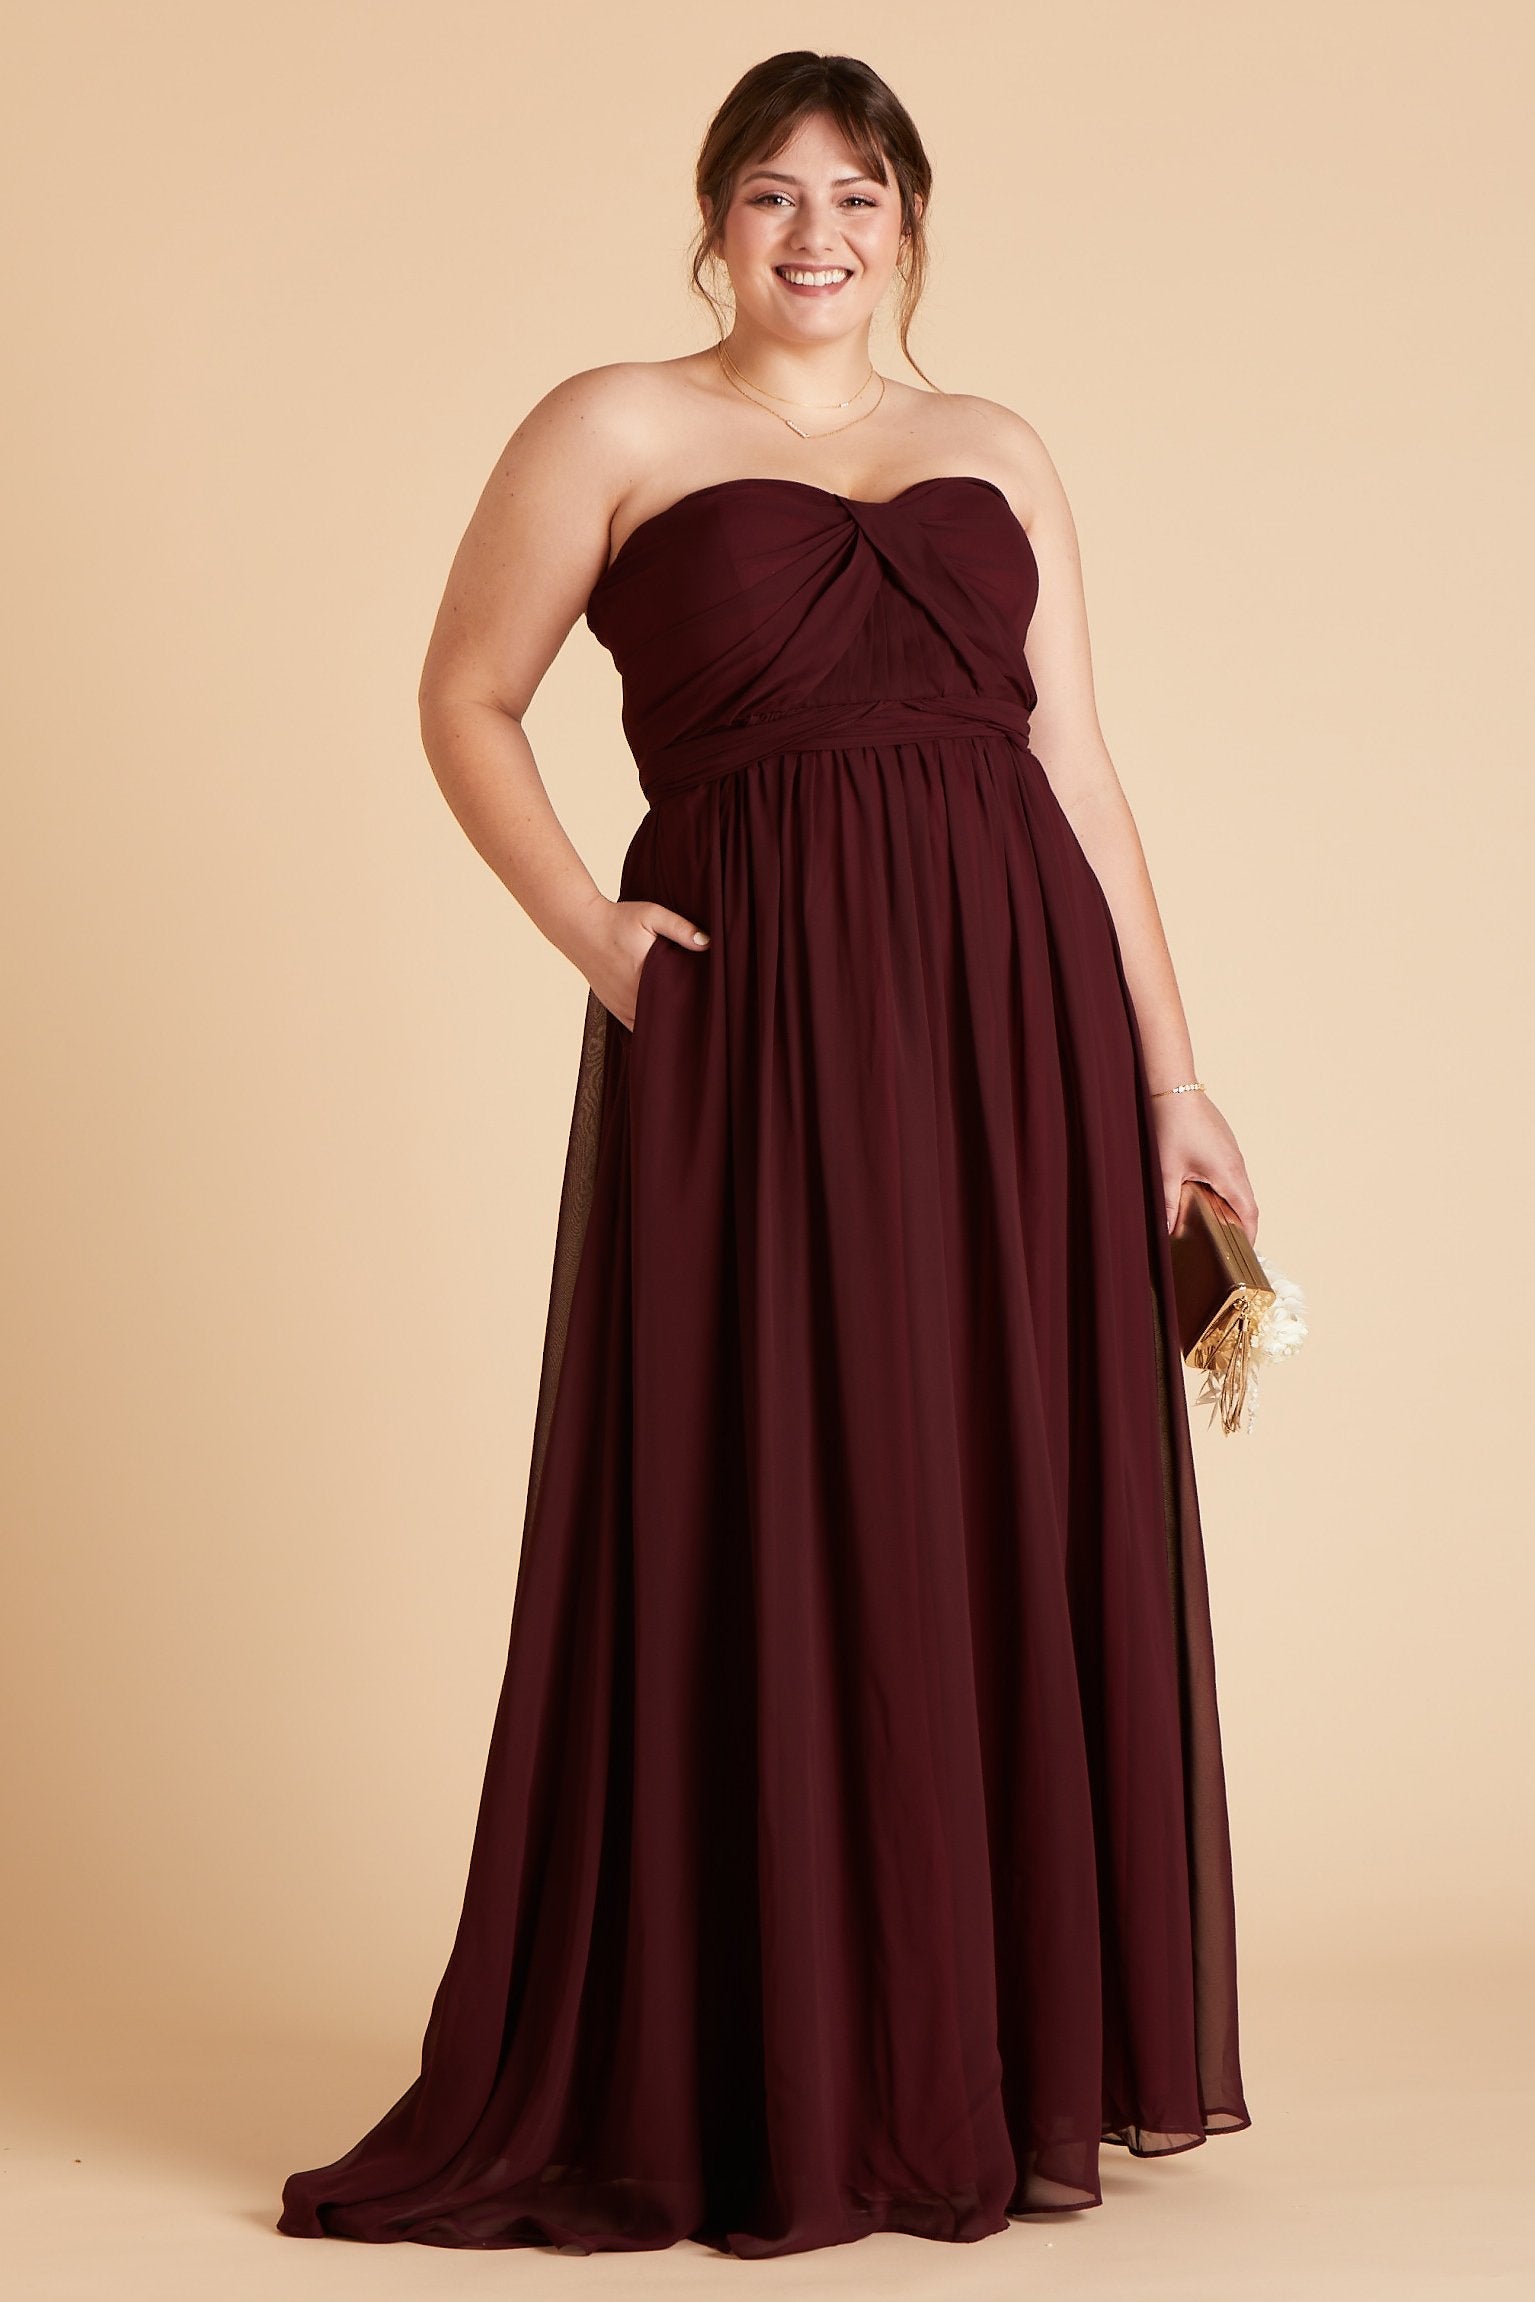 Grace convertible plus size bridesmaid dress in cabernet burgundy chiffon by Birdy Grey, front view with hand in pocket